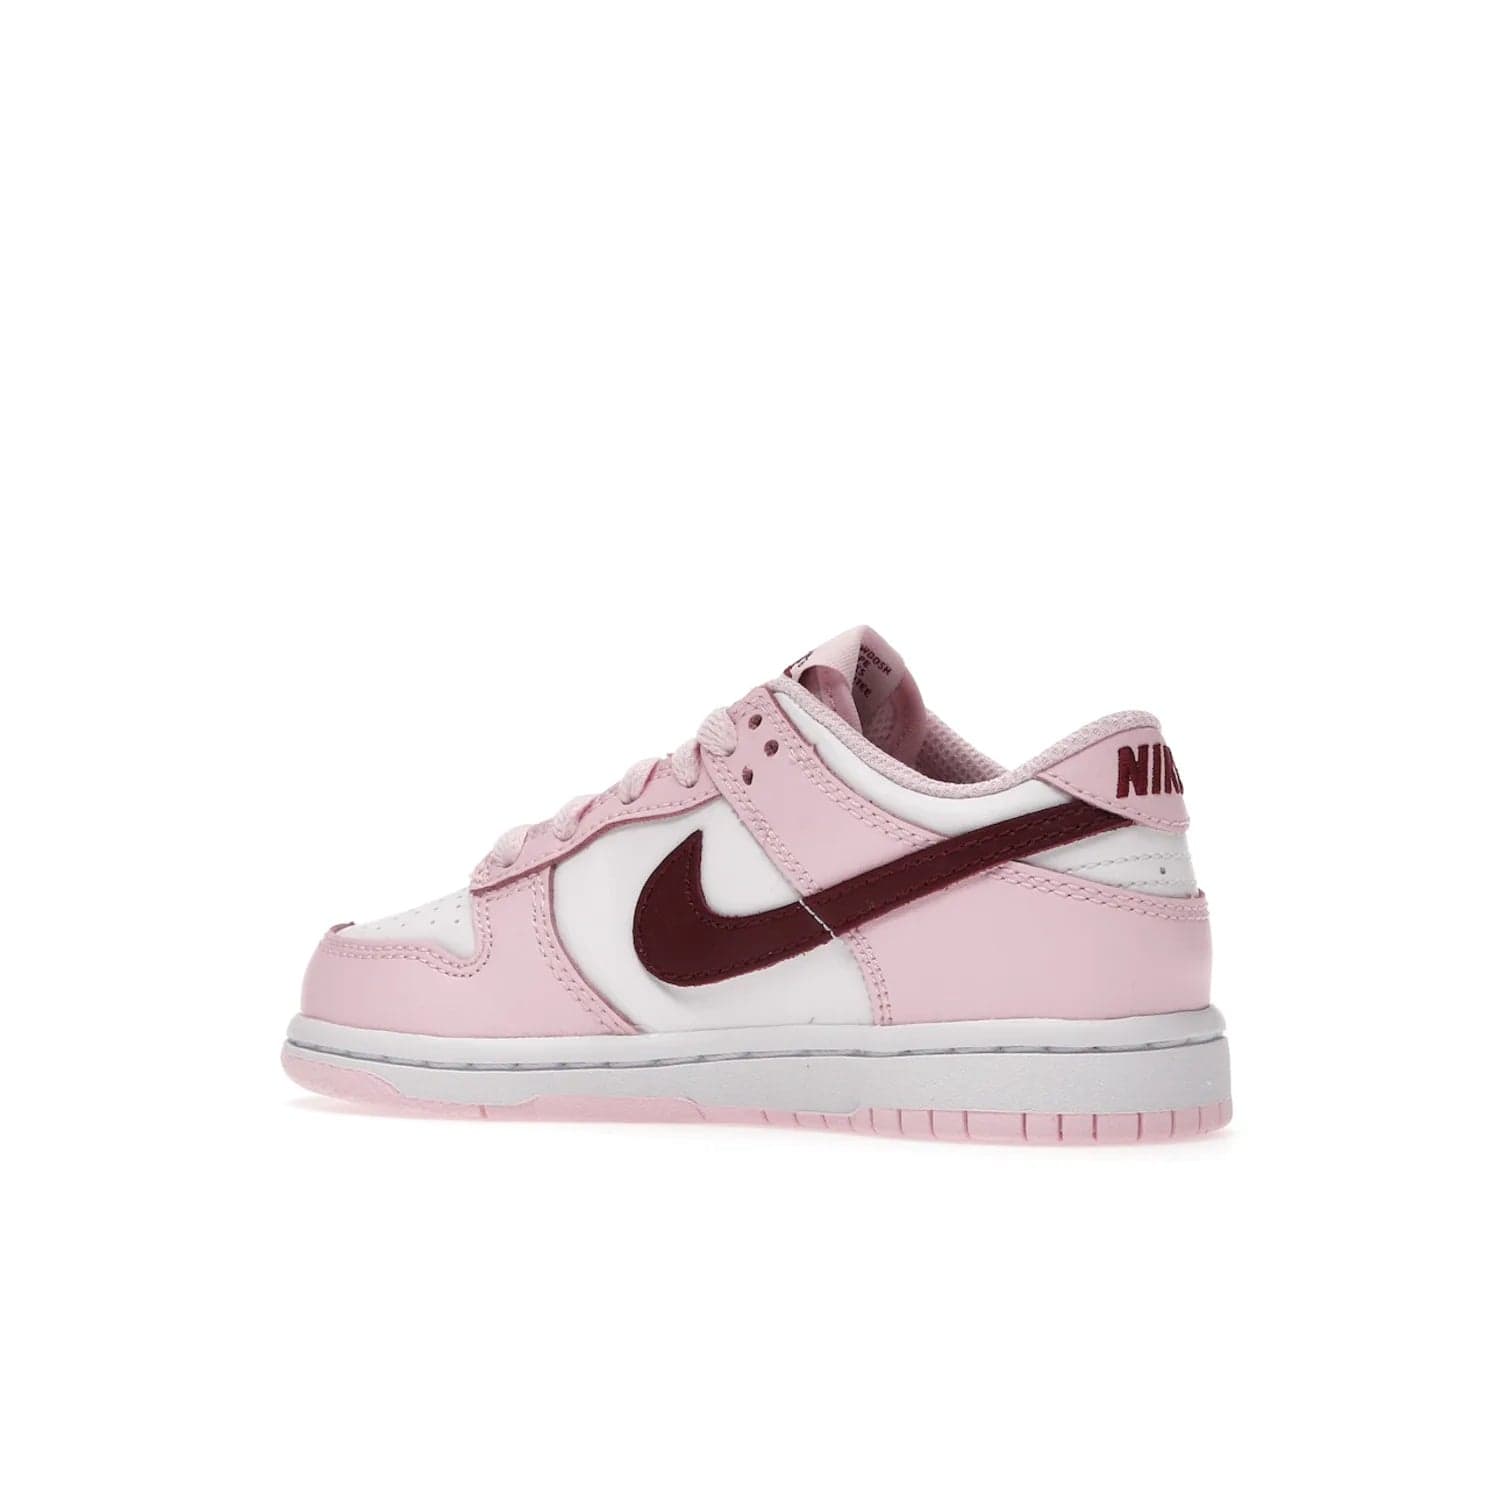 Nike Dunk Low Pink Red White (PS) - Image 22 - Only at www.BallersClubKickz.com - Introducing the Nike Dunk Low Pink Red White (PS), the perfect addition to your sneaker collection. A classic silhouette with modern vibrant colors, including a pink upper with red and white accents and a white midsole. Comfort and durability, perfect for any outfit. Limited edition, available June 22nd.